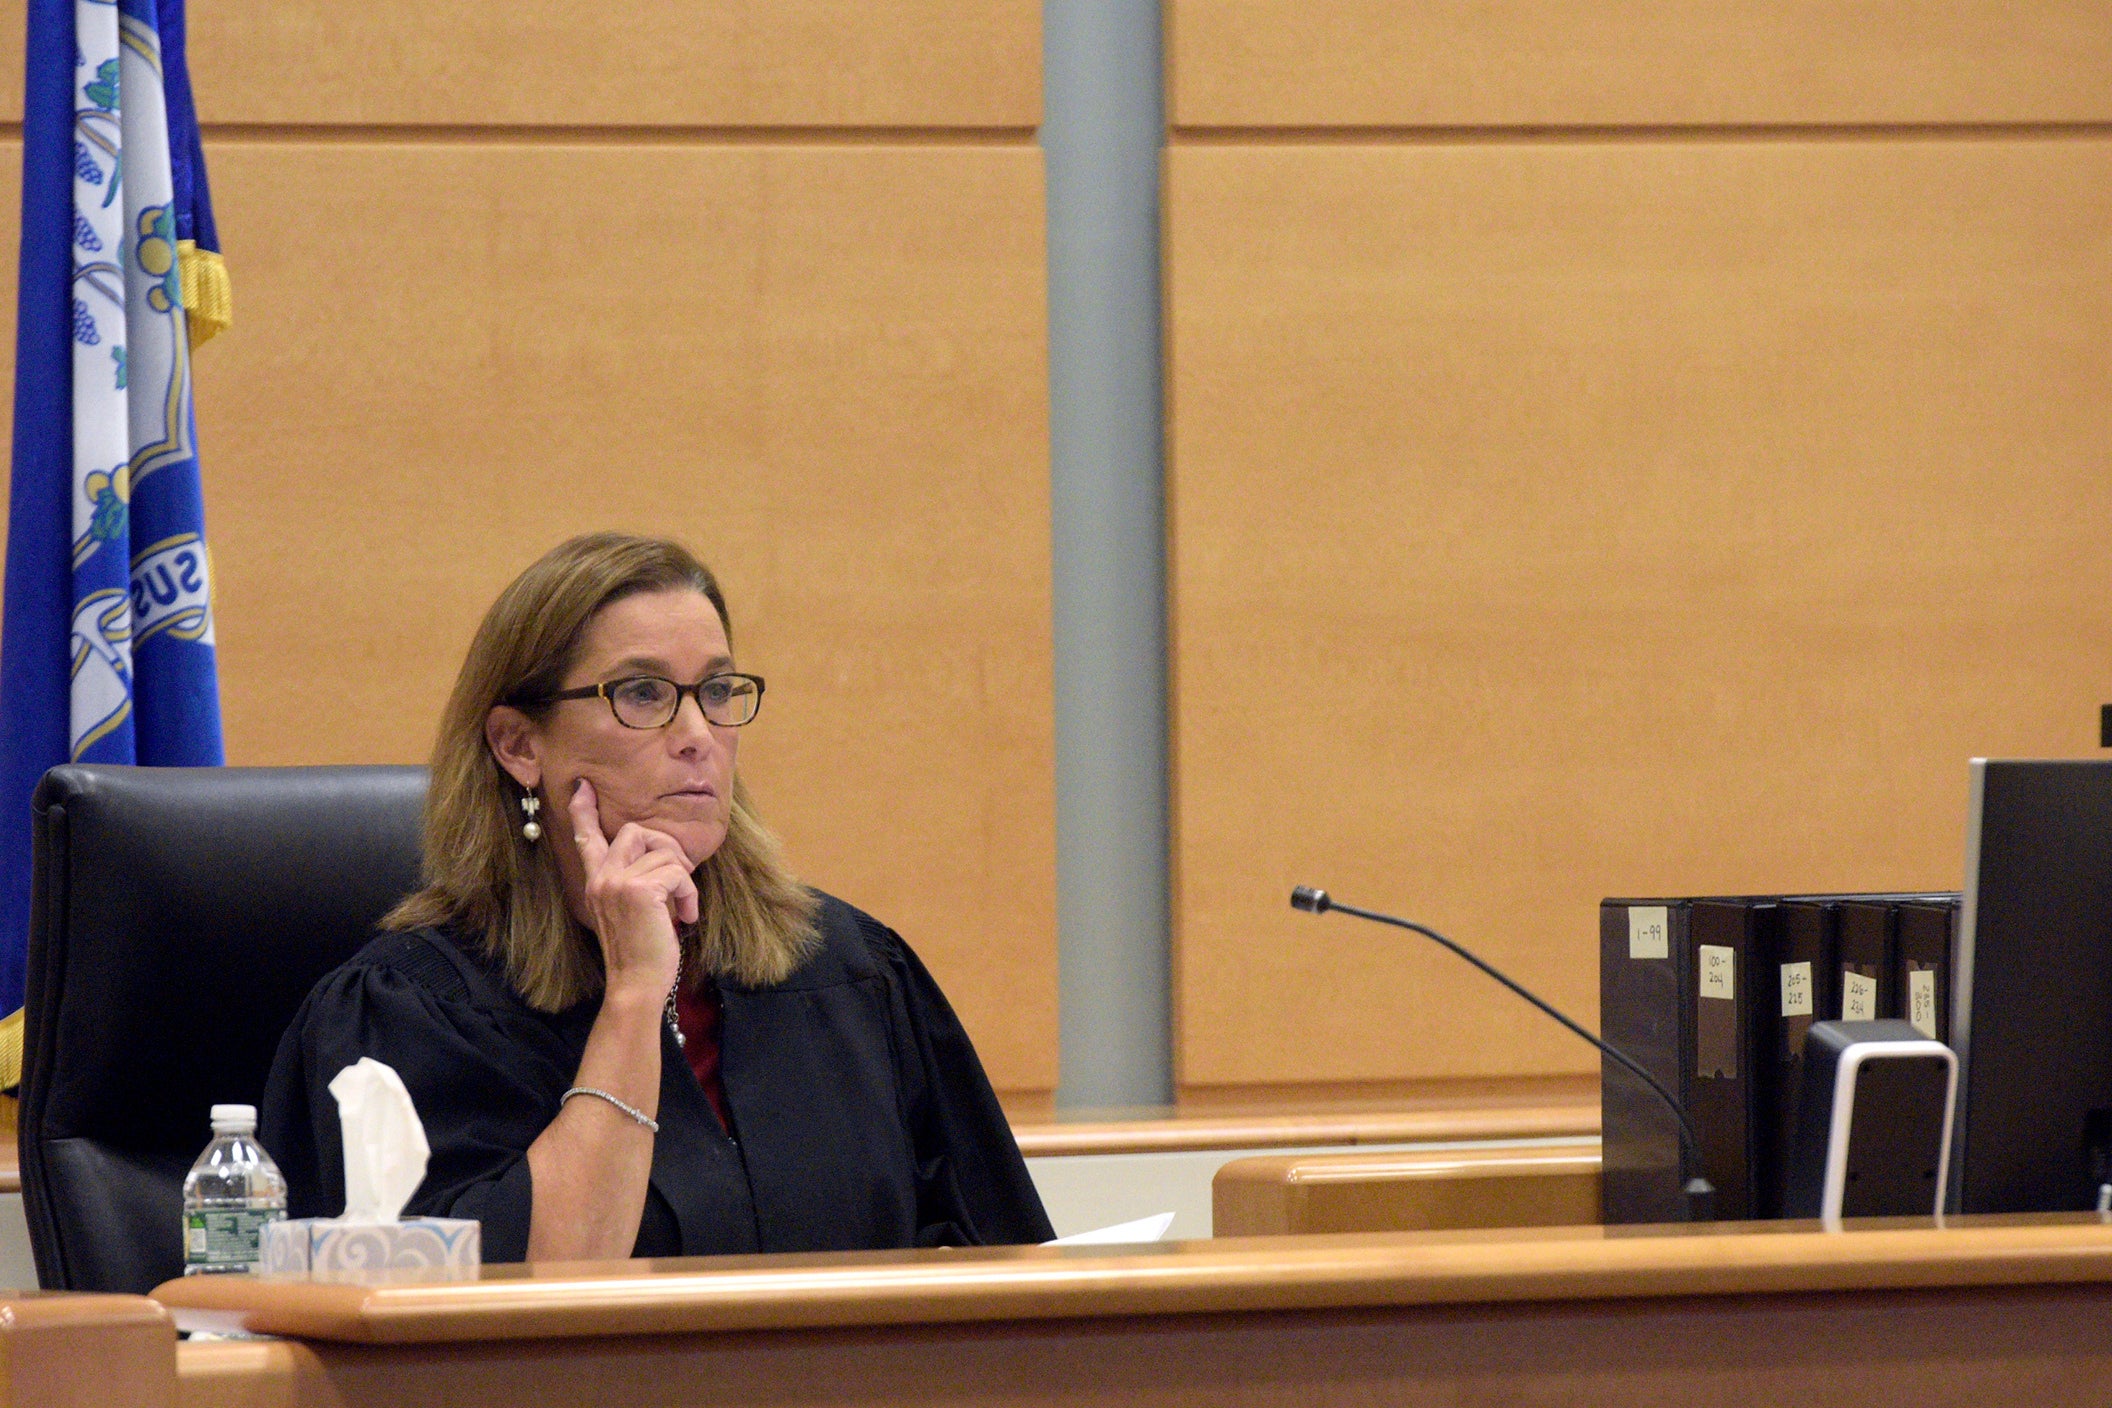 Judge Barbara Bellis presided over the trial and will decide on final damages